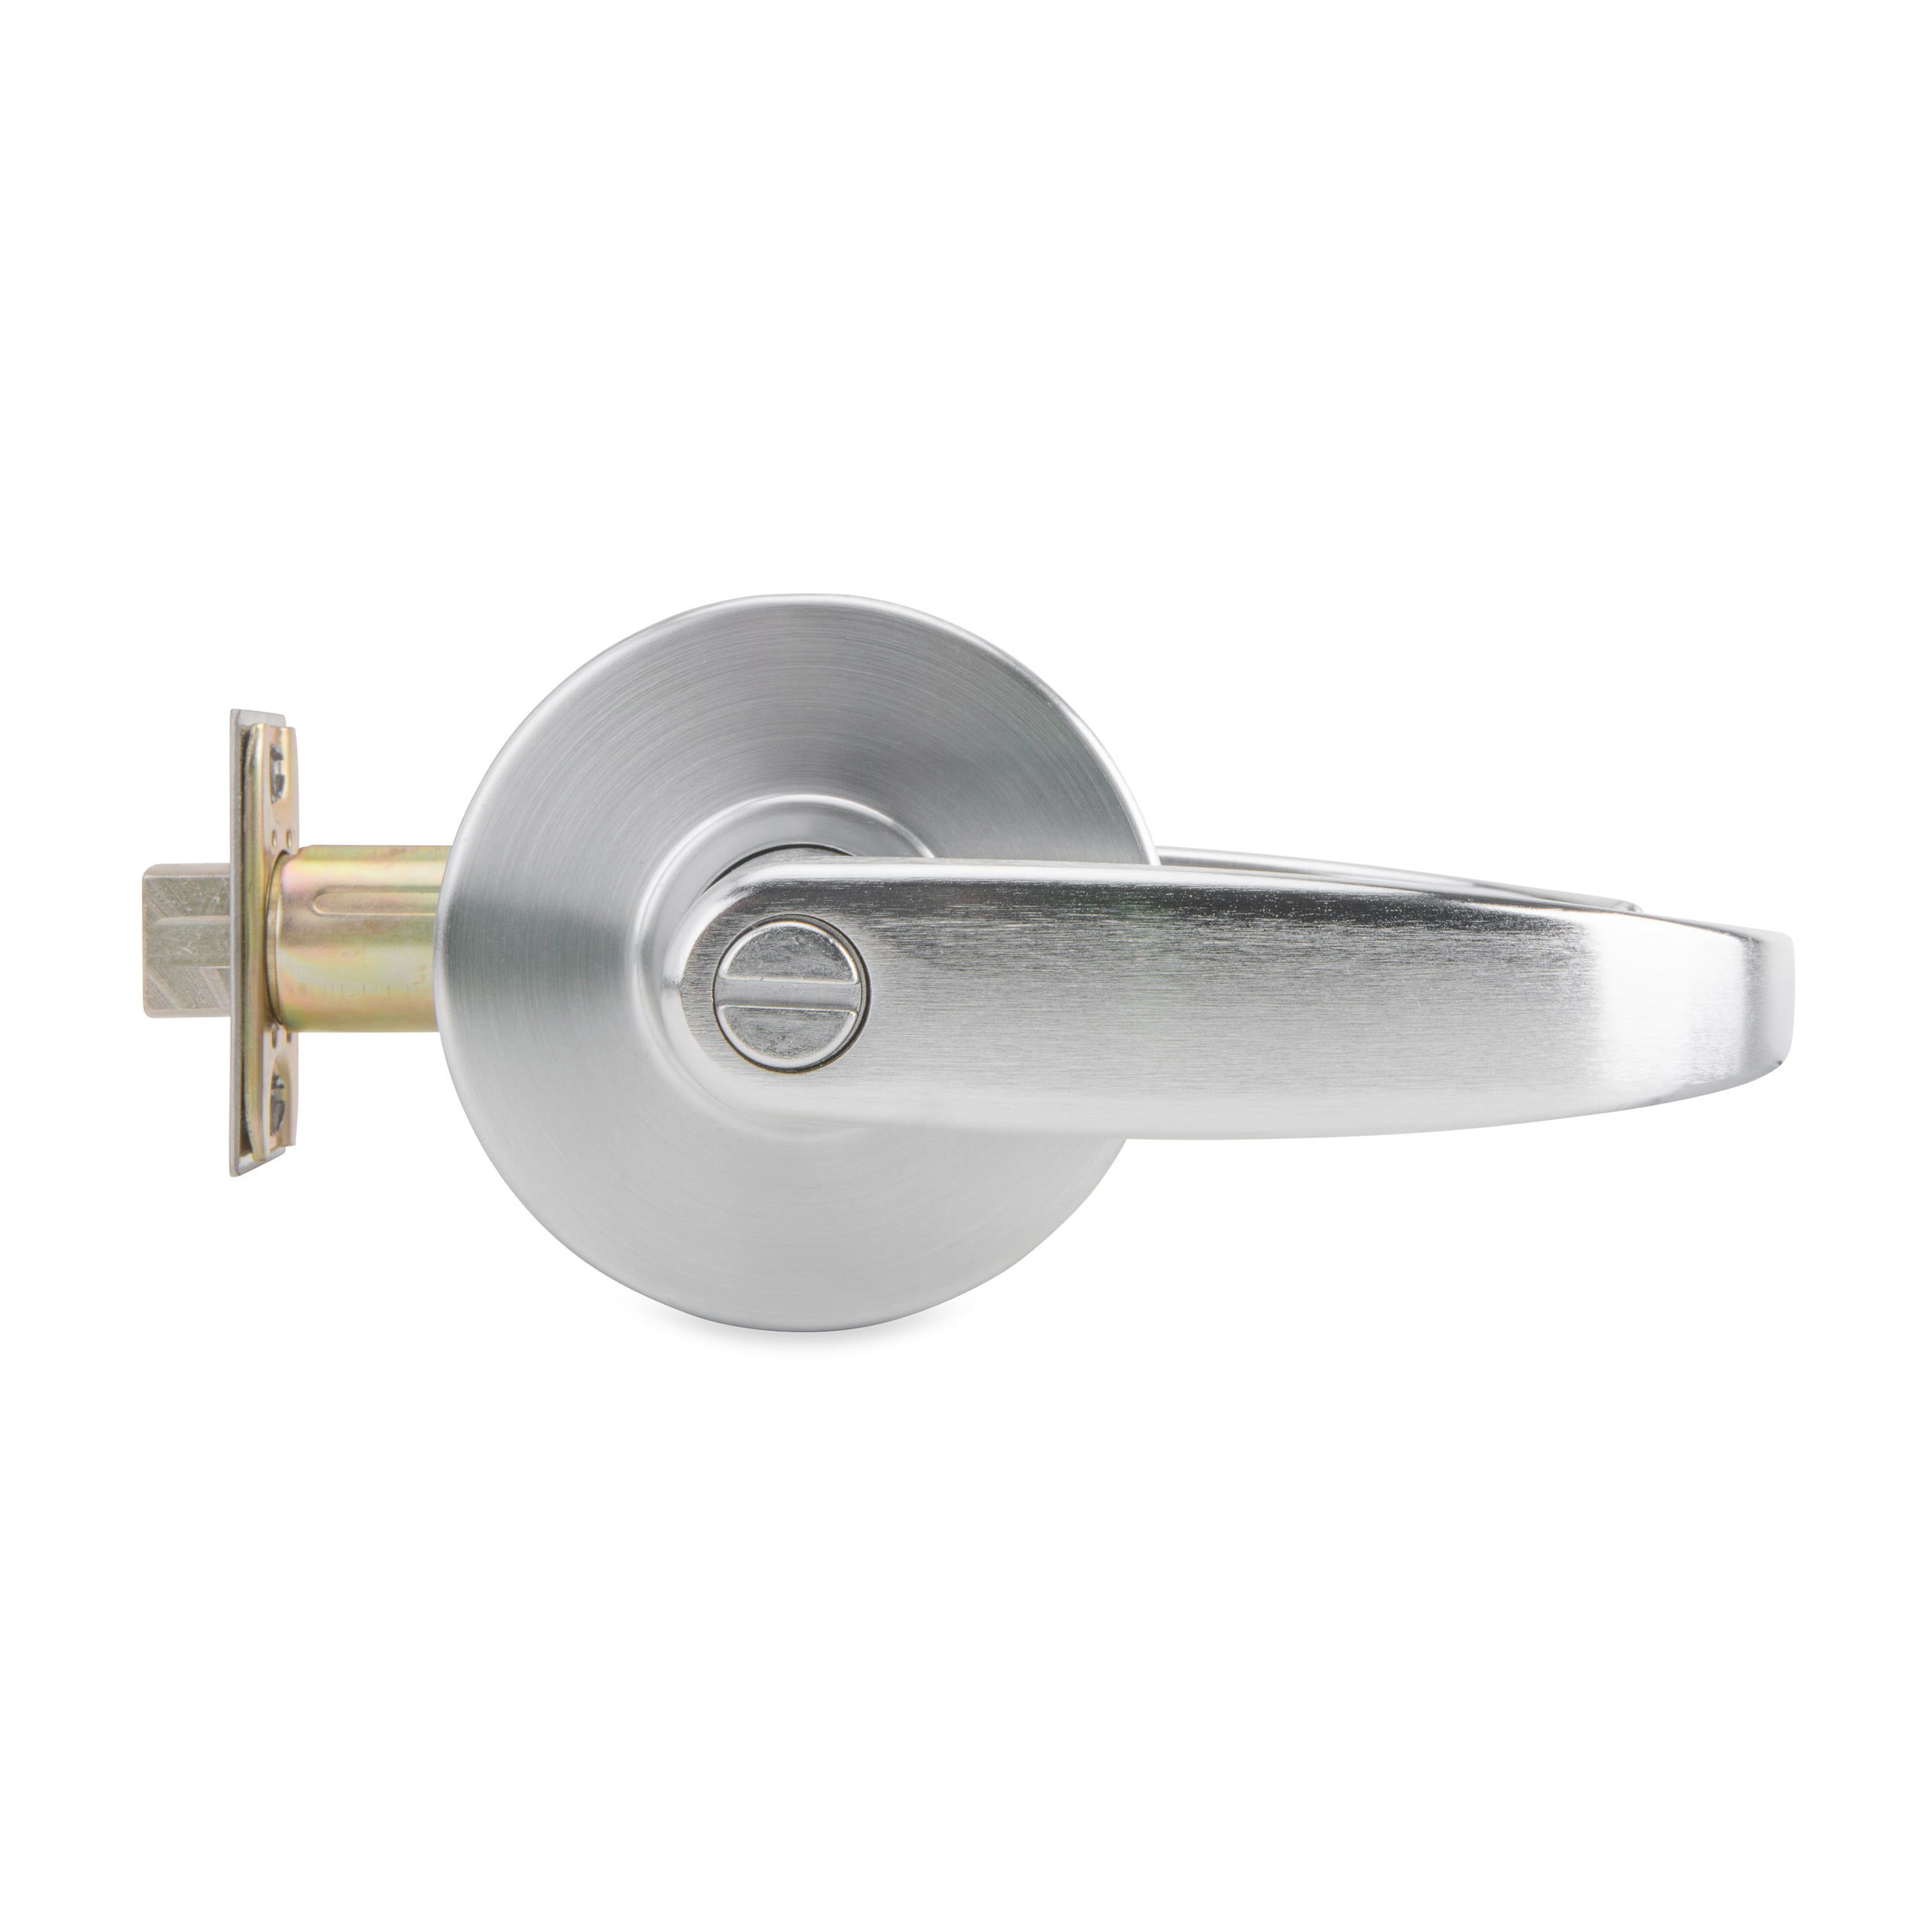 Global Door Controls GAL Commercial Lever Handle Grade Passage Room  Function in Satin Chrome Finish